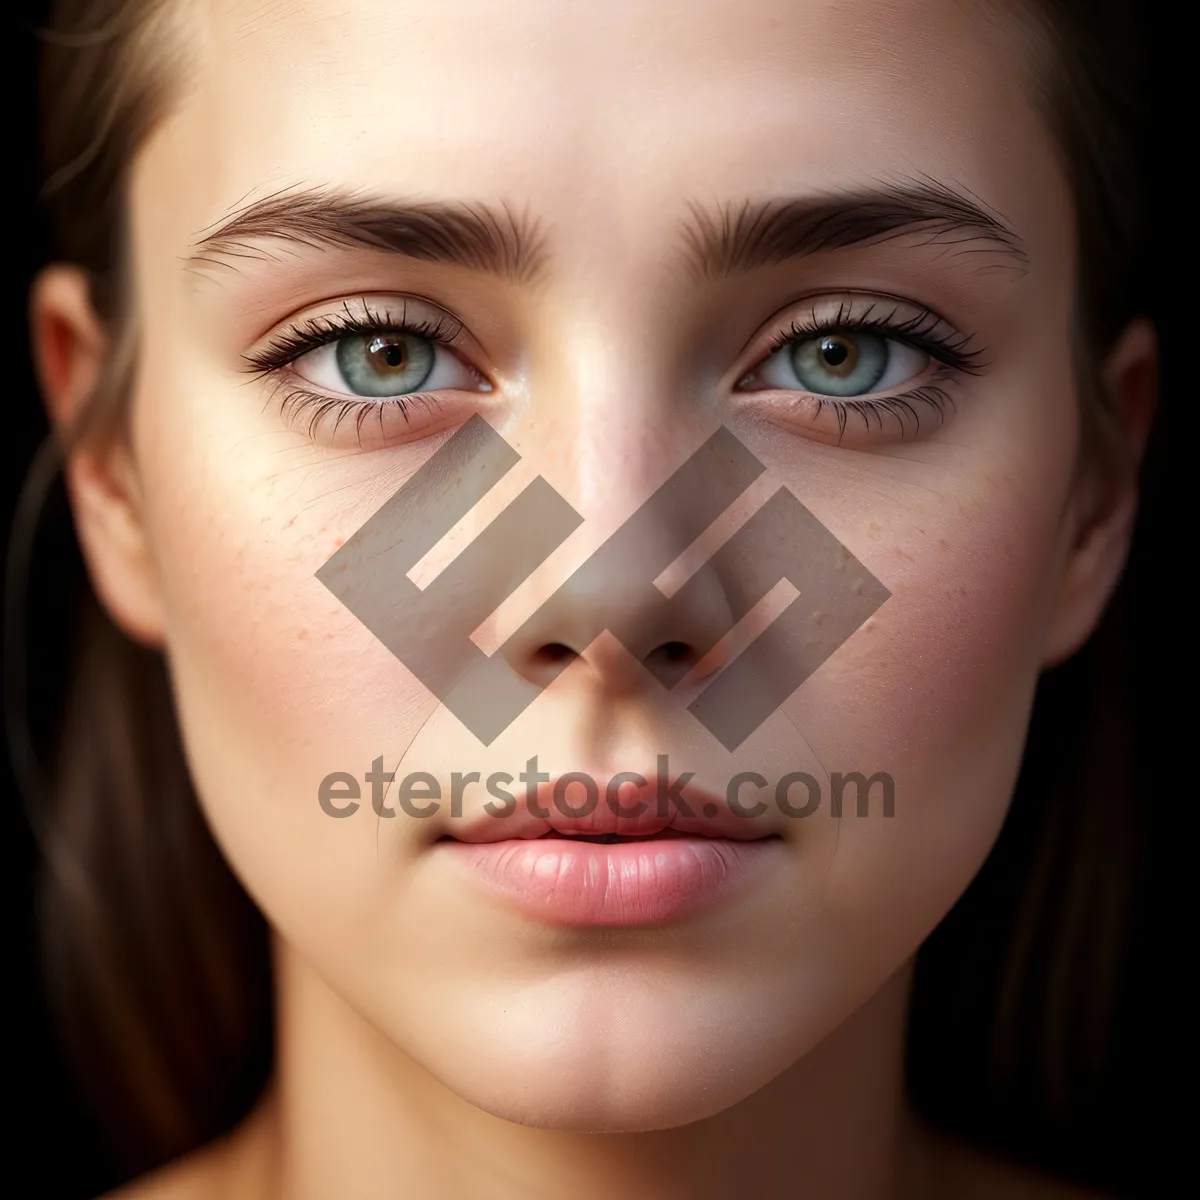 Picture of Radiant Beauty: Captivating Closeup of Attractive Model